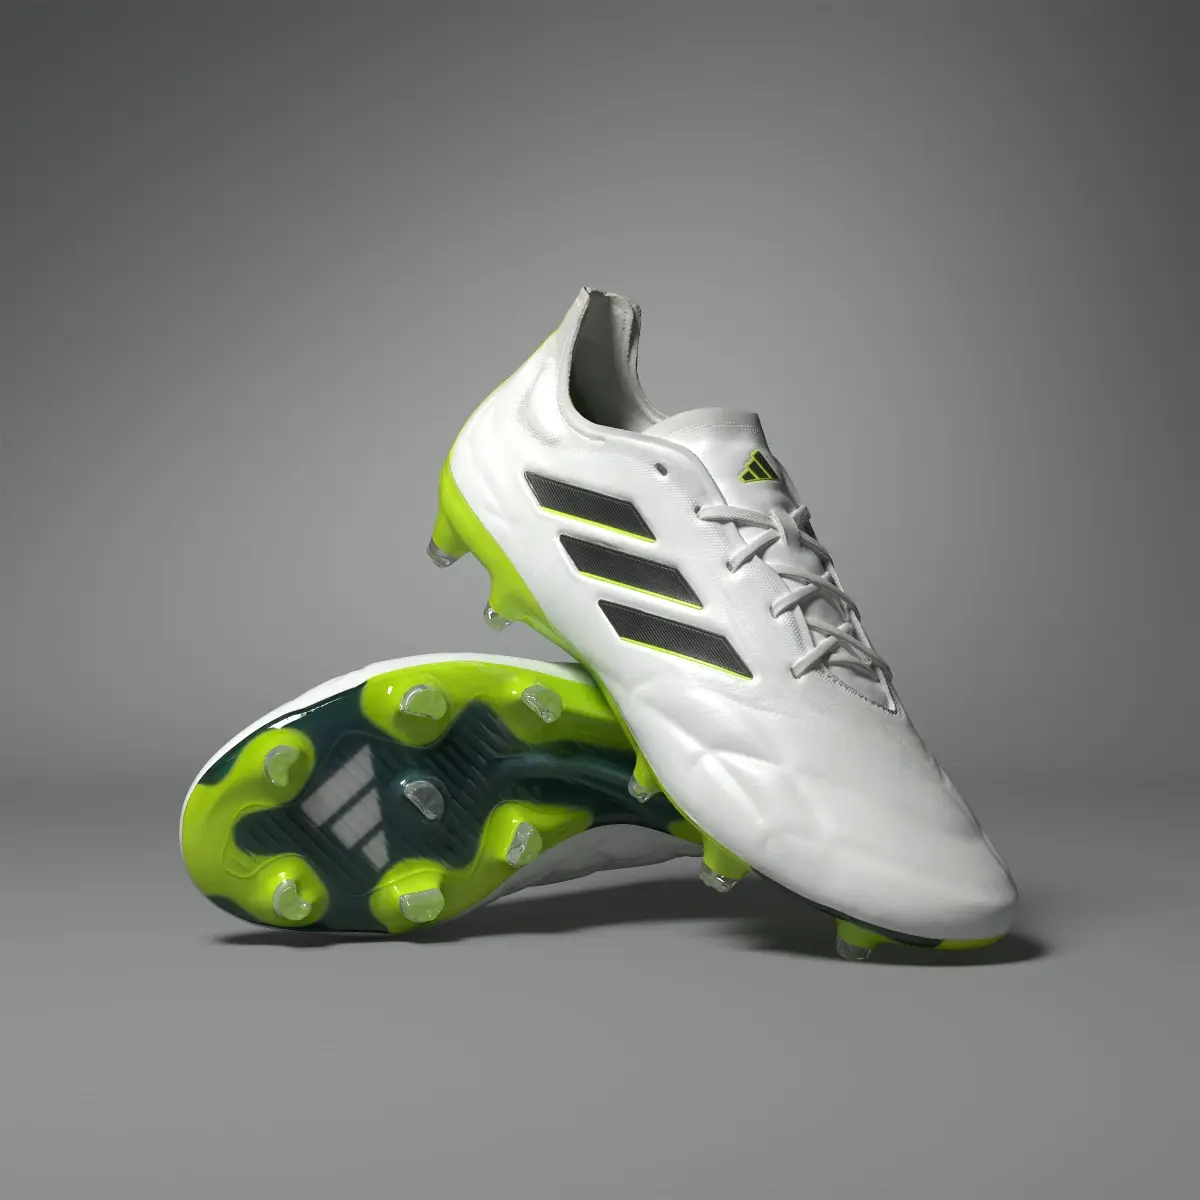 Adidas Copa Pure II.1 Firm Ground Boots. 1